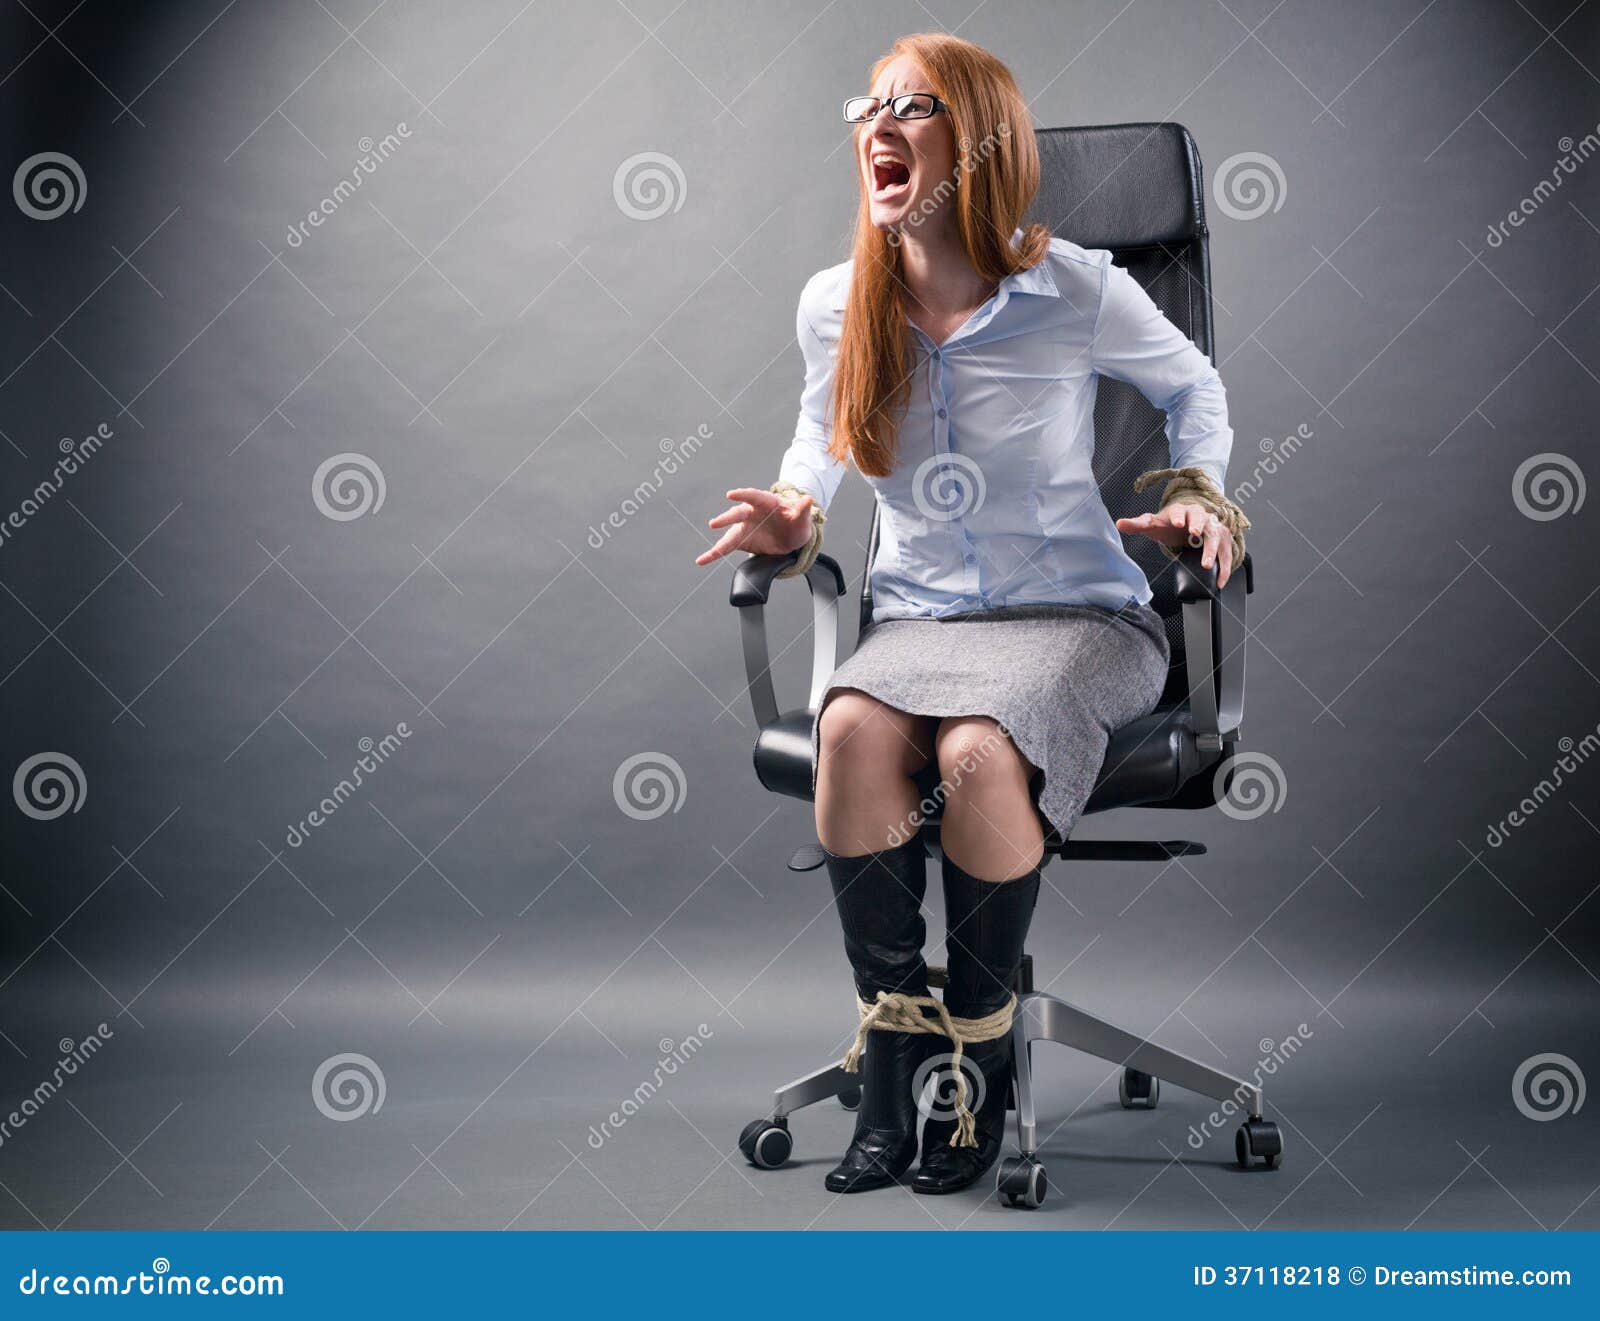 tied-up-woman-no-freedom-business-young-businesswoman-confined-to-office-chair-shouting-help-trying-to-free-37118218.jpg